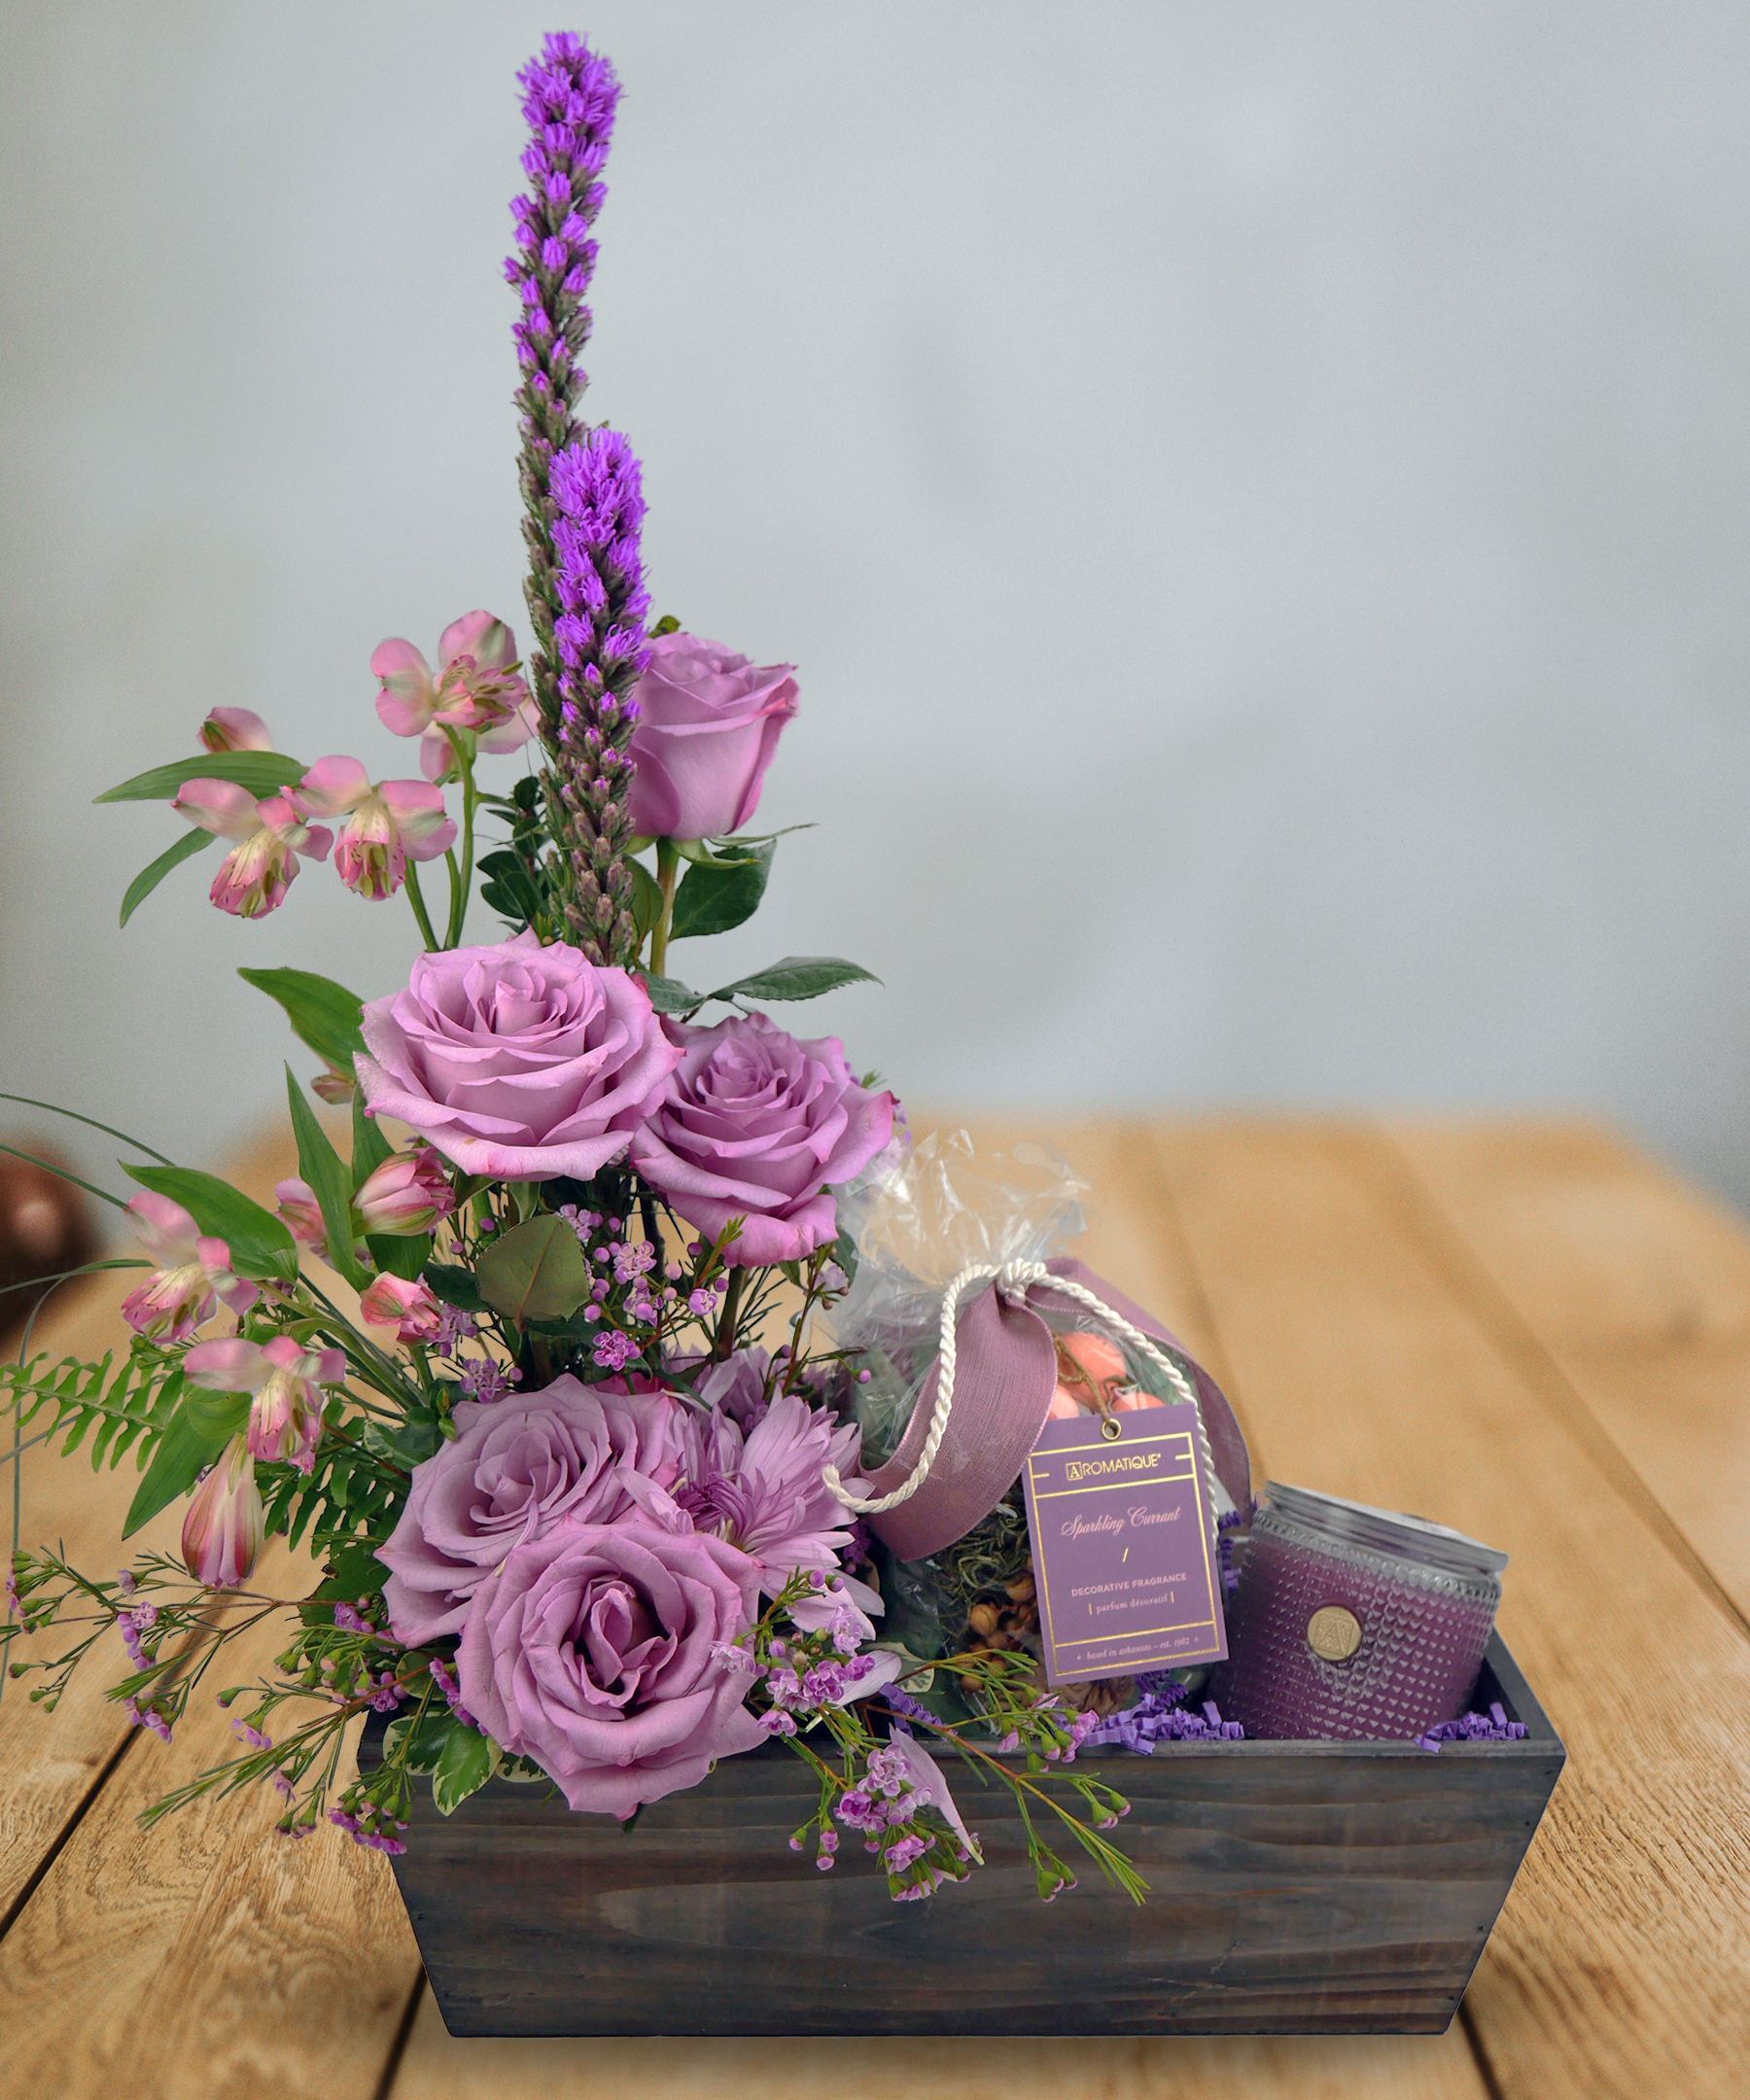 Purple flowers in a wooden box with a purple candle